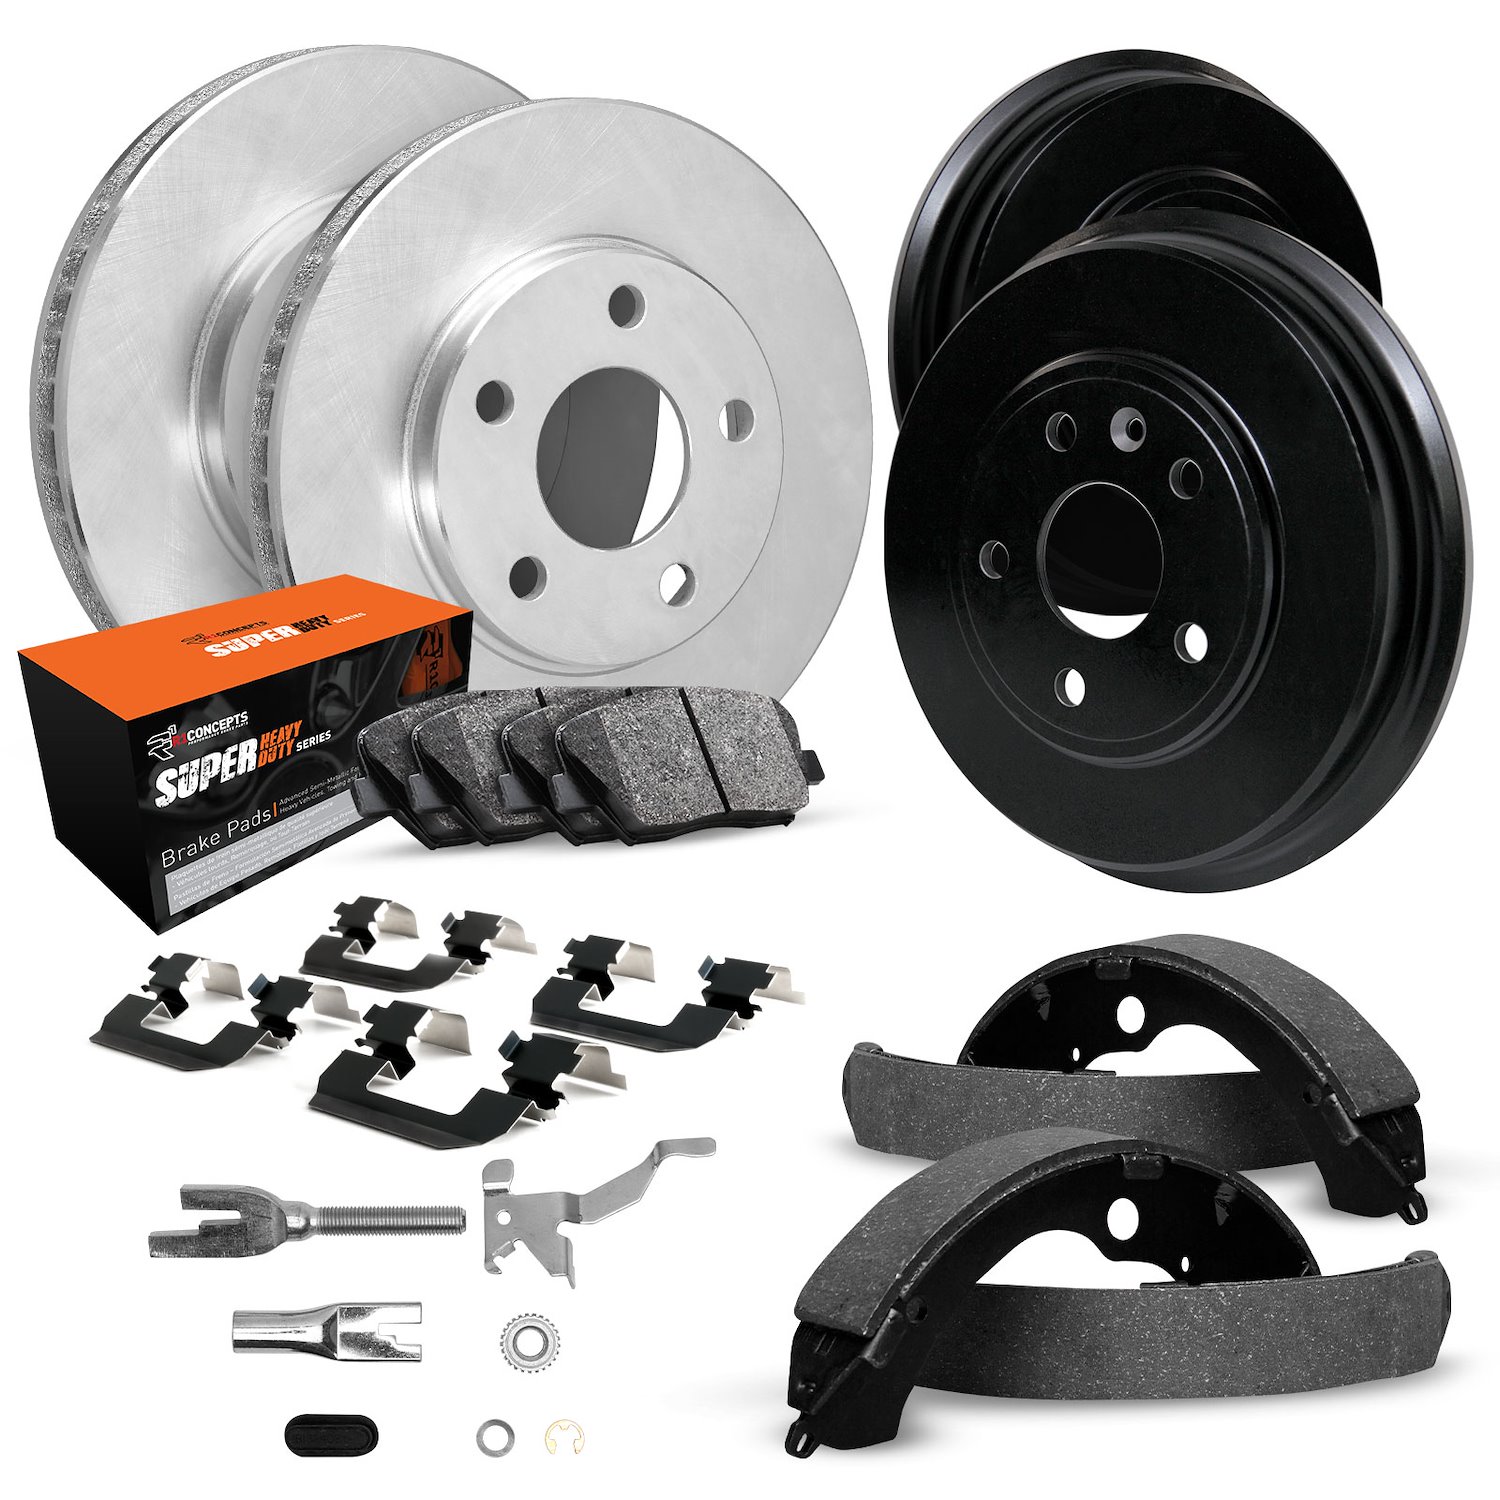 E-Line Blank Brake Rotor & Drum Set w/Super-Duty Pads, Shoes, Hardware, & Adjusters, 2000-2004 Ford/Lincoln/Mercury/Mazda